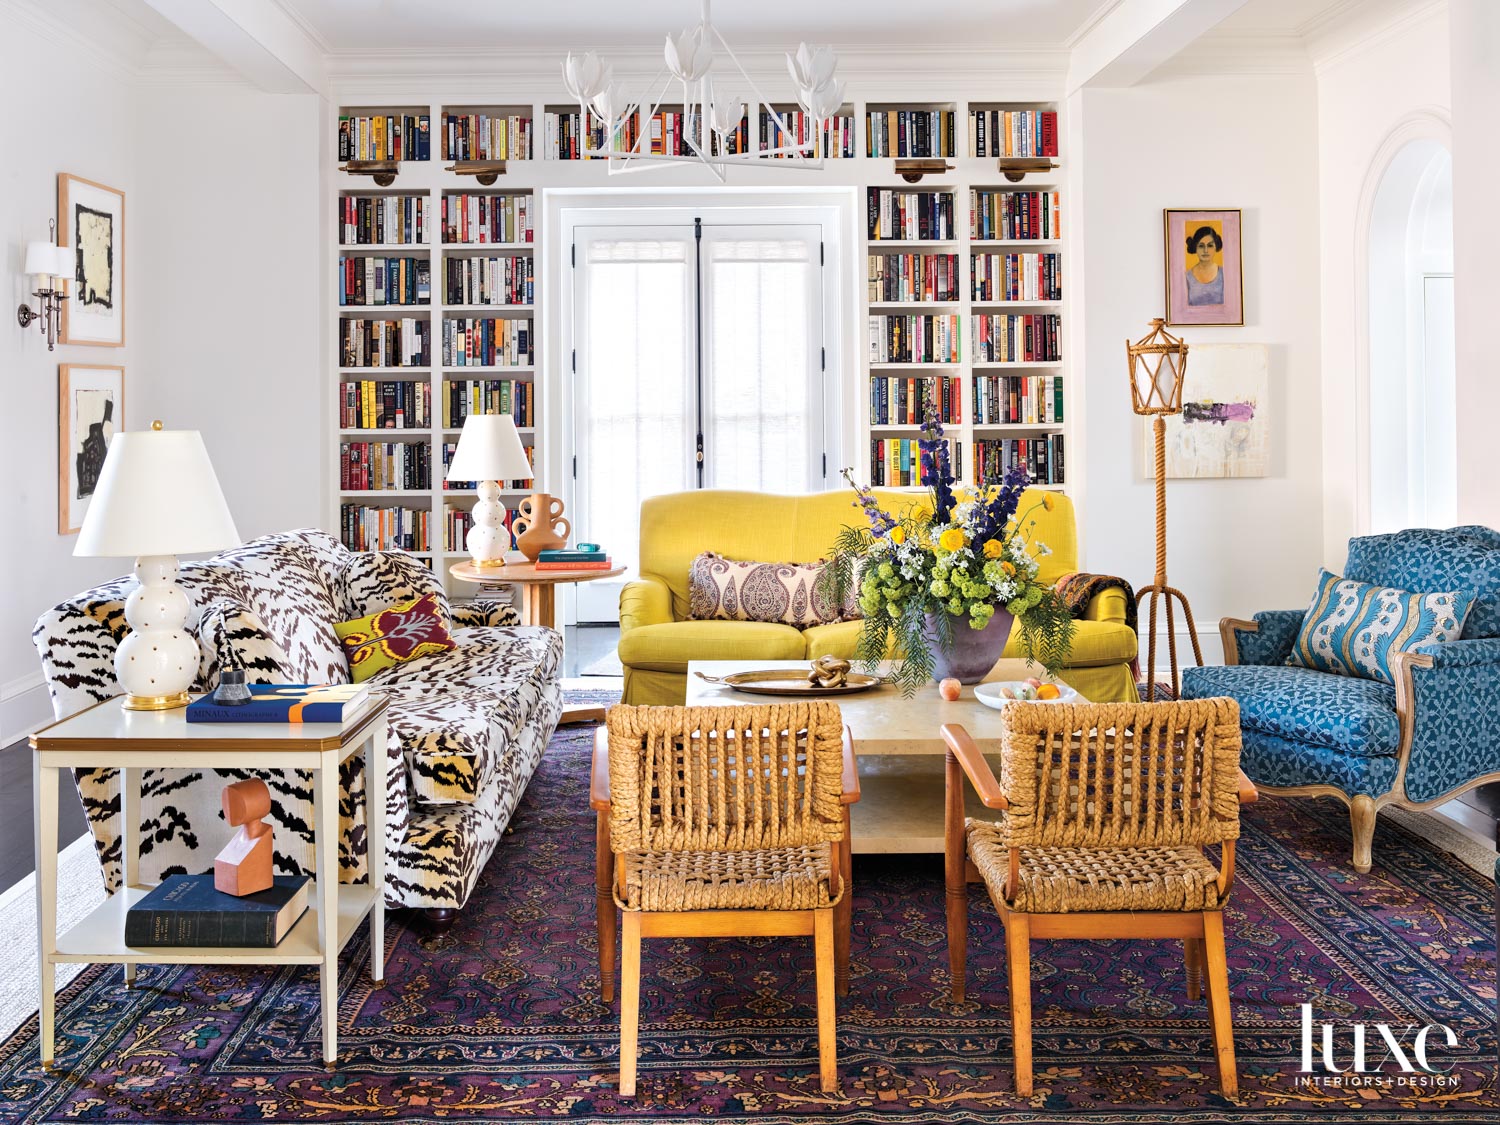 A family room with a mix of patterns and colors including a yellow couch, a tiger print couch and a blue patterned armchair.